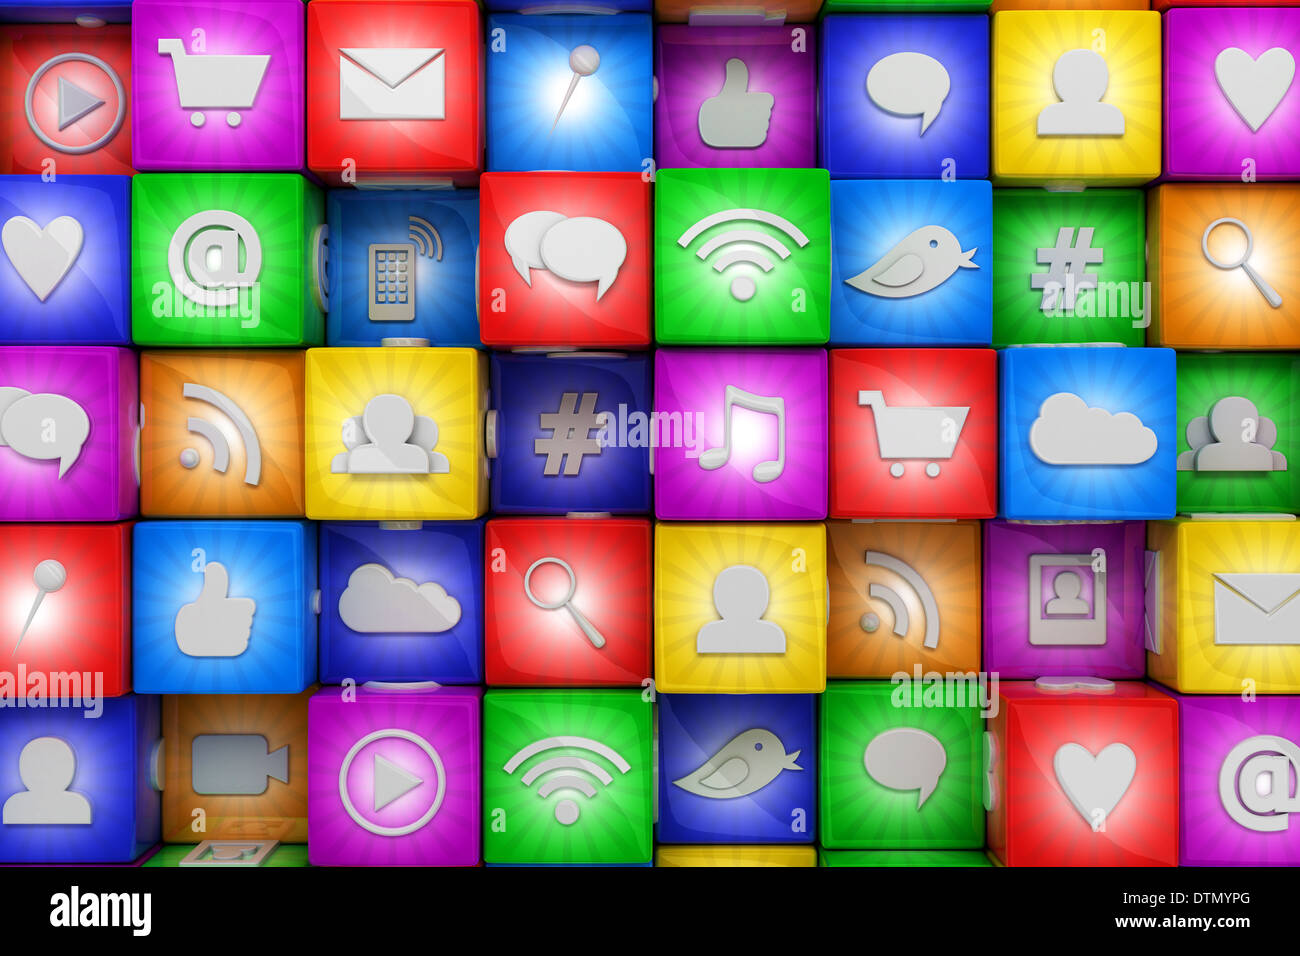 Colorful social media icons Stock Photo